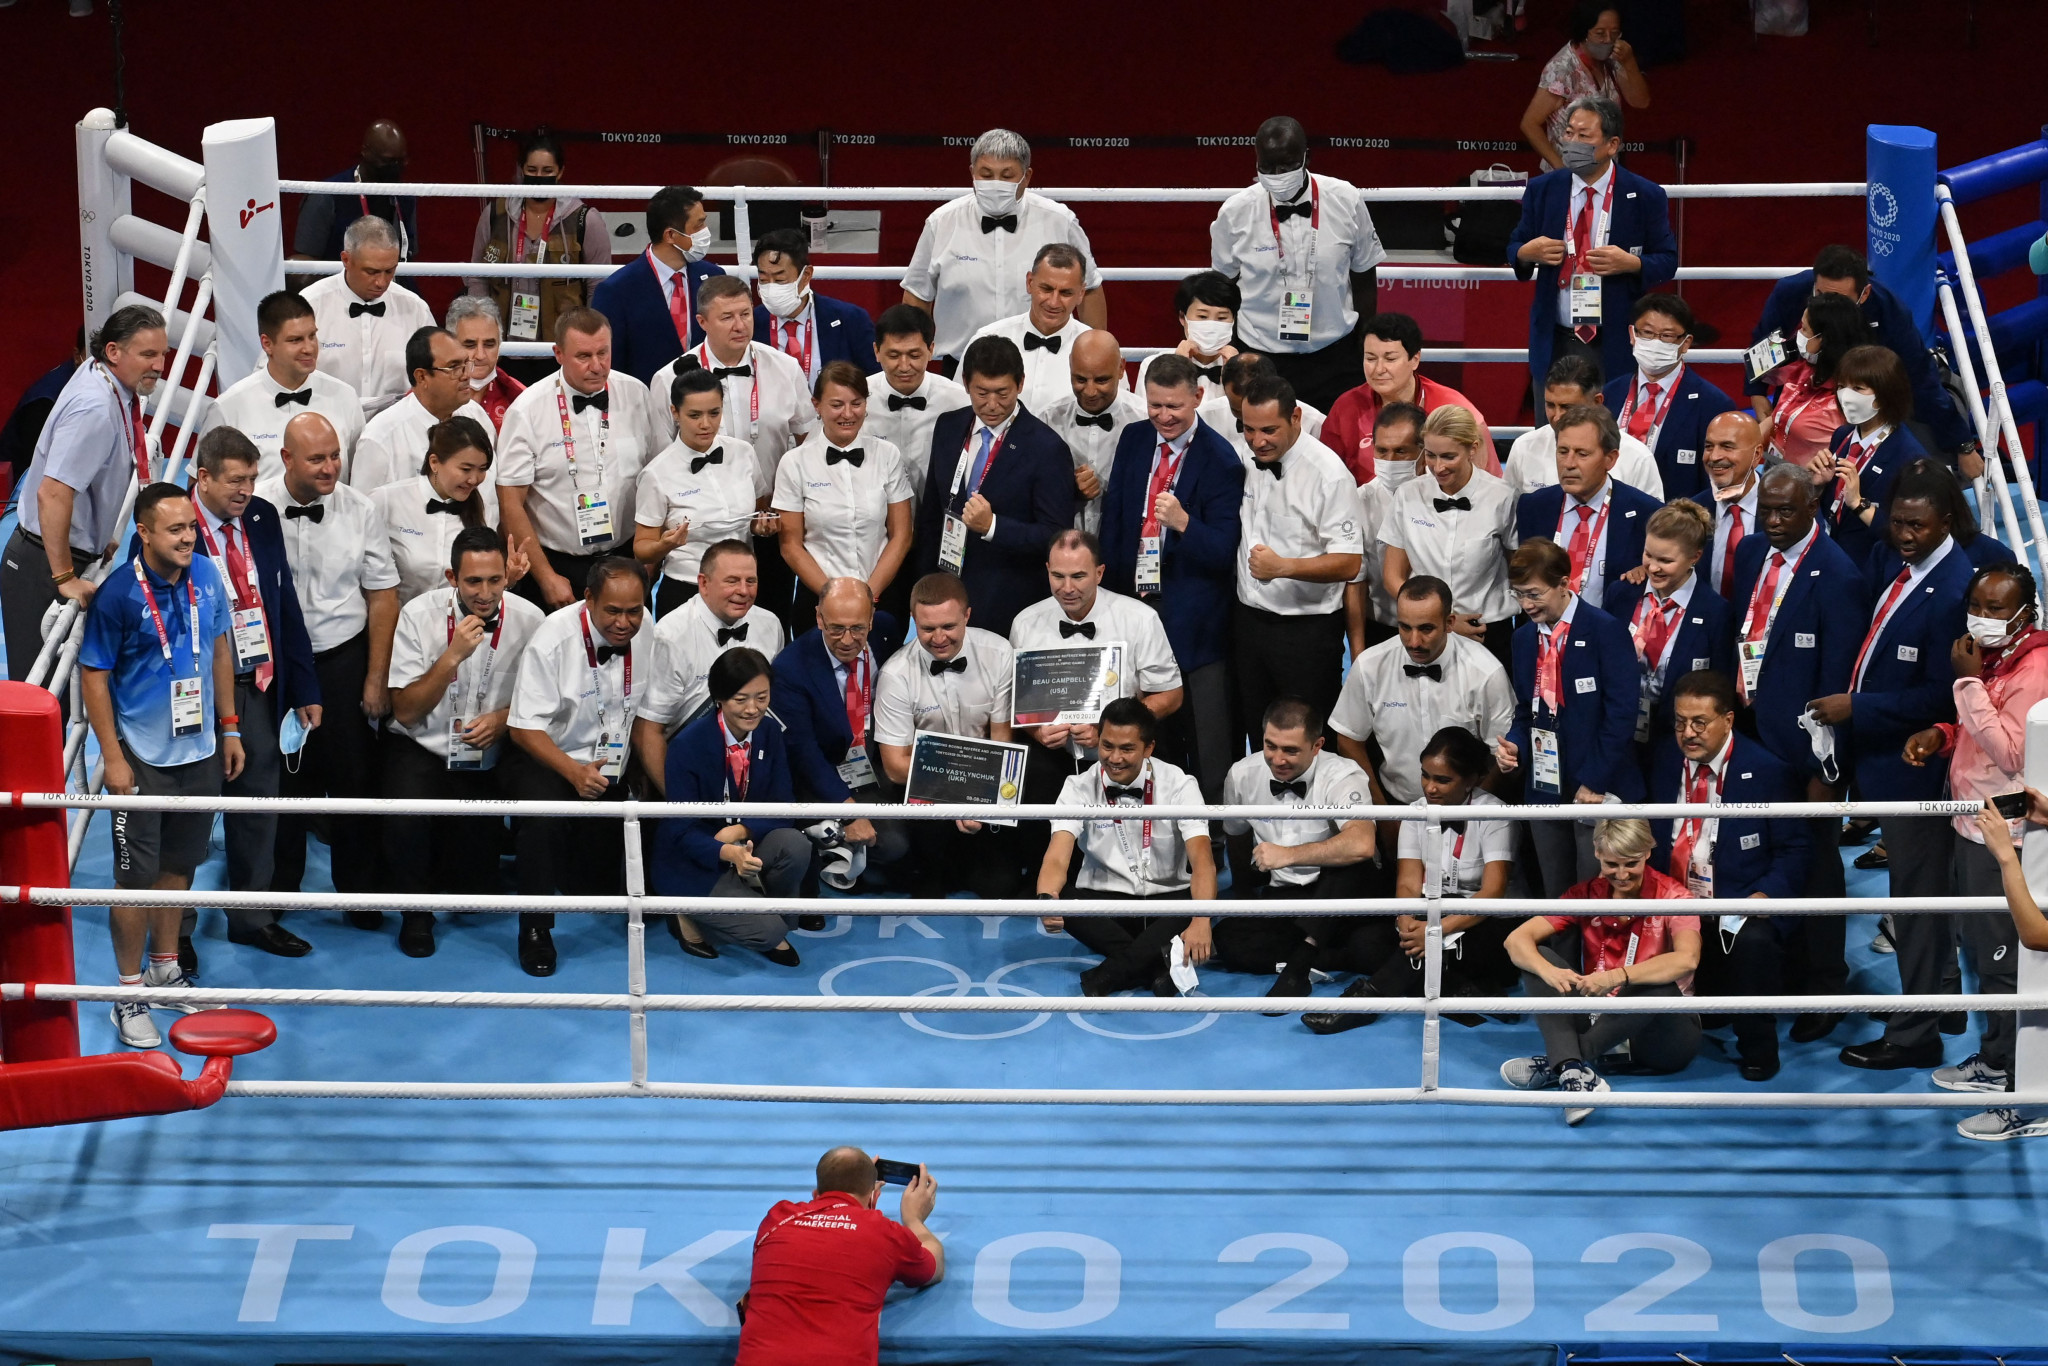 The IBA has objected to the IOC's appeal to its technical officials for their interest in participating in Paris 2024 qualifiers and the boxing tournament ©Getty Images